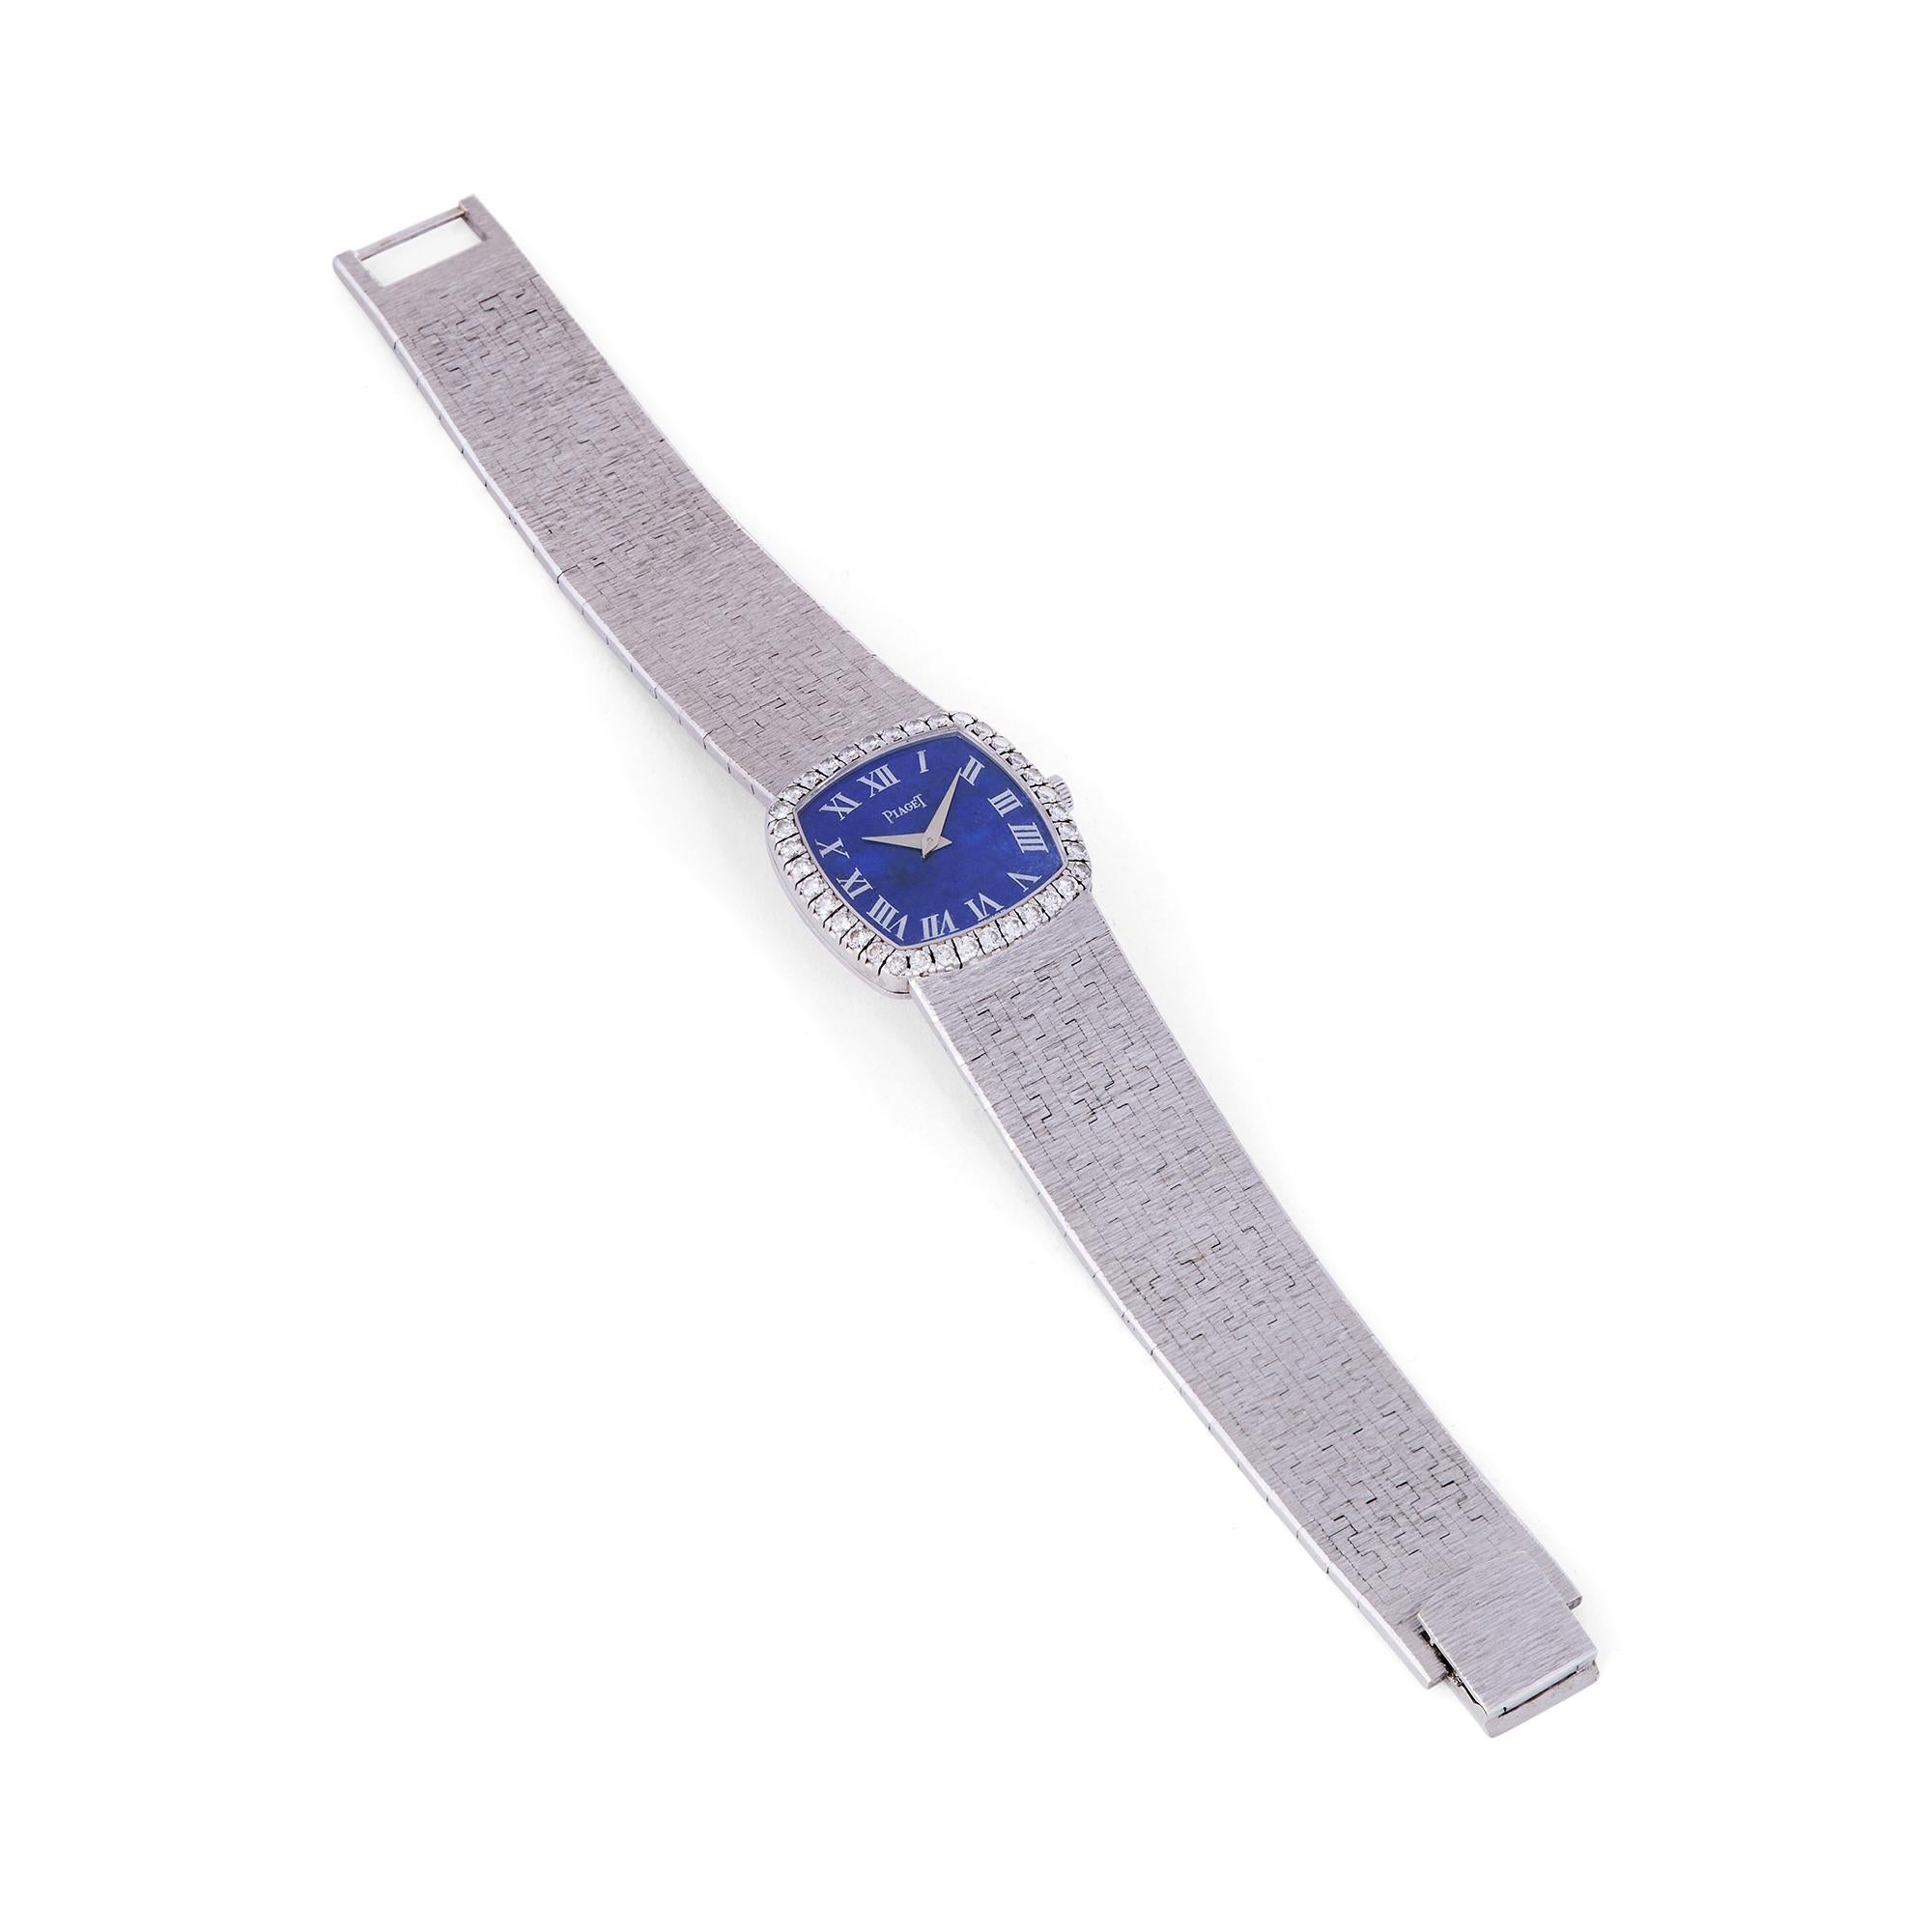 Authentic Piaget Black Tie watch crafted in 18 karat white gold. 23mm case with round brilliant cut diamonds, 18k white gold bracelet, lapis lazuli dial. Manual wind movement. Will fit up to a 6 inch wrist.  CIRCA 1960s

Brand: Piaget
Collection: